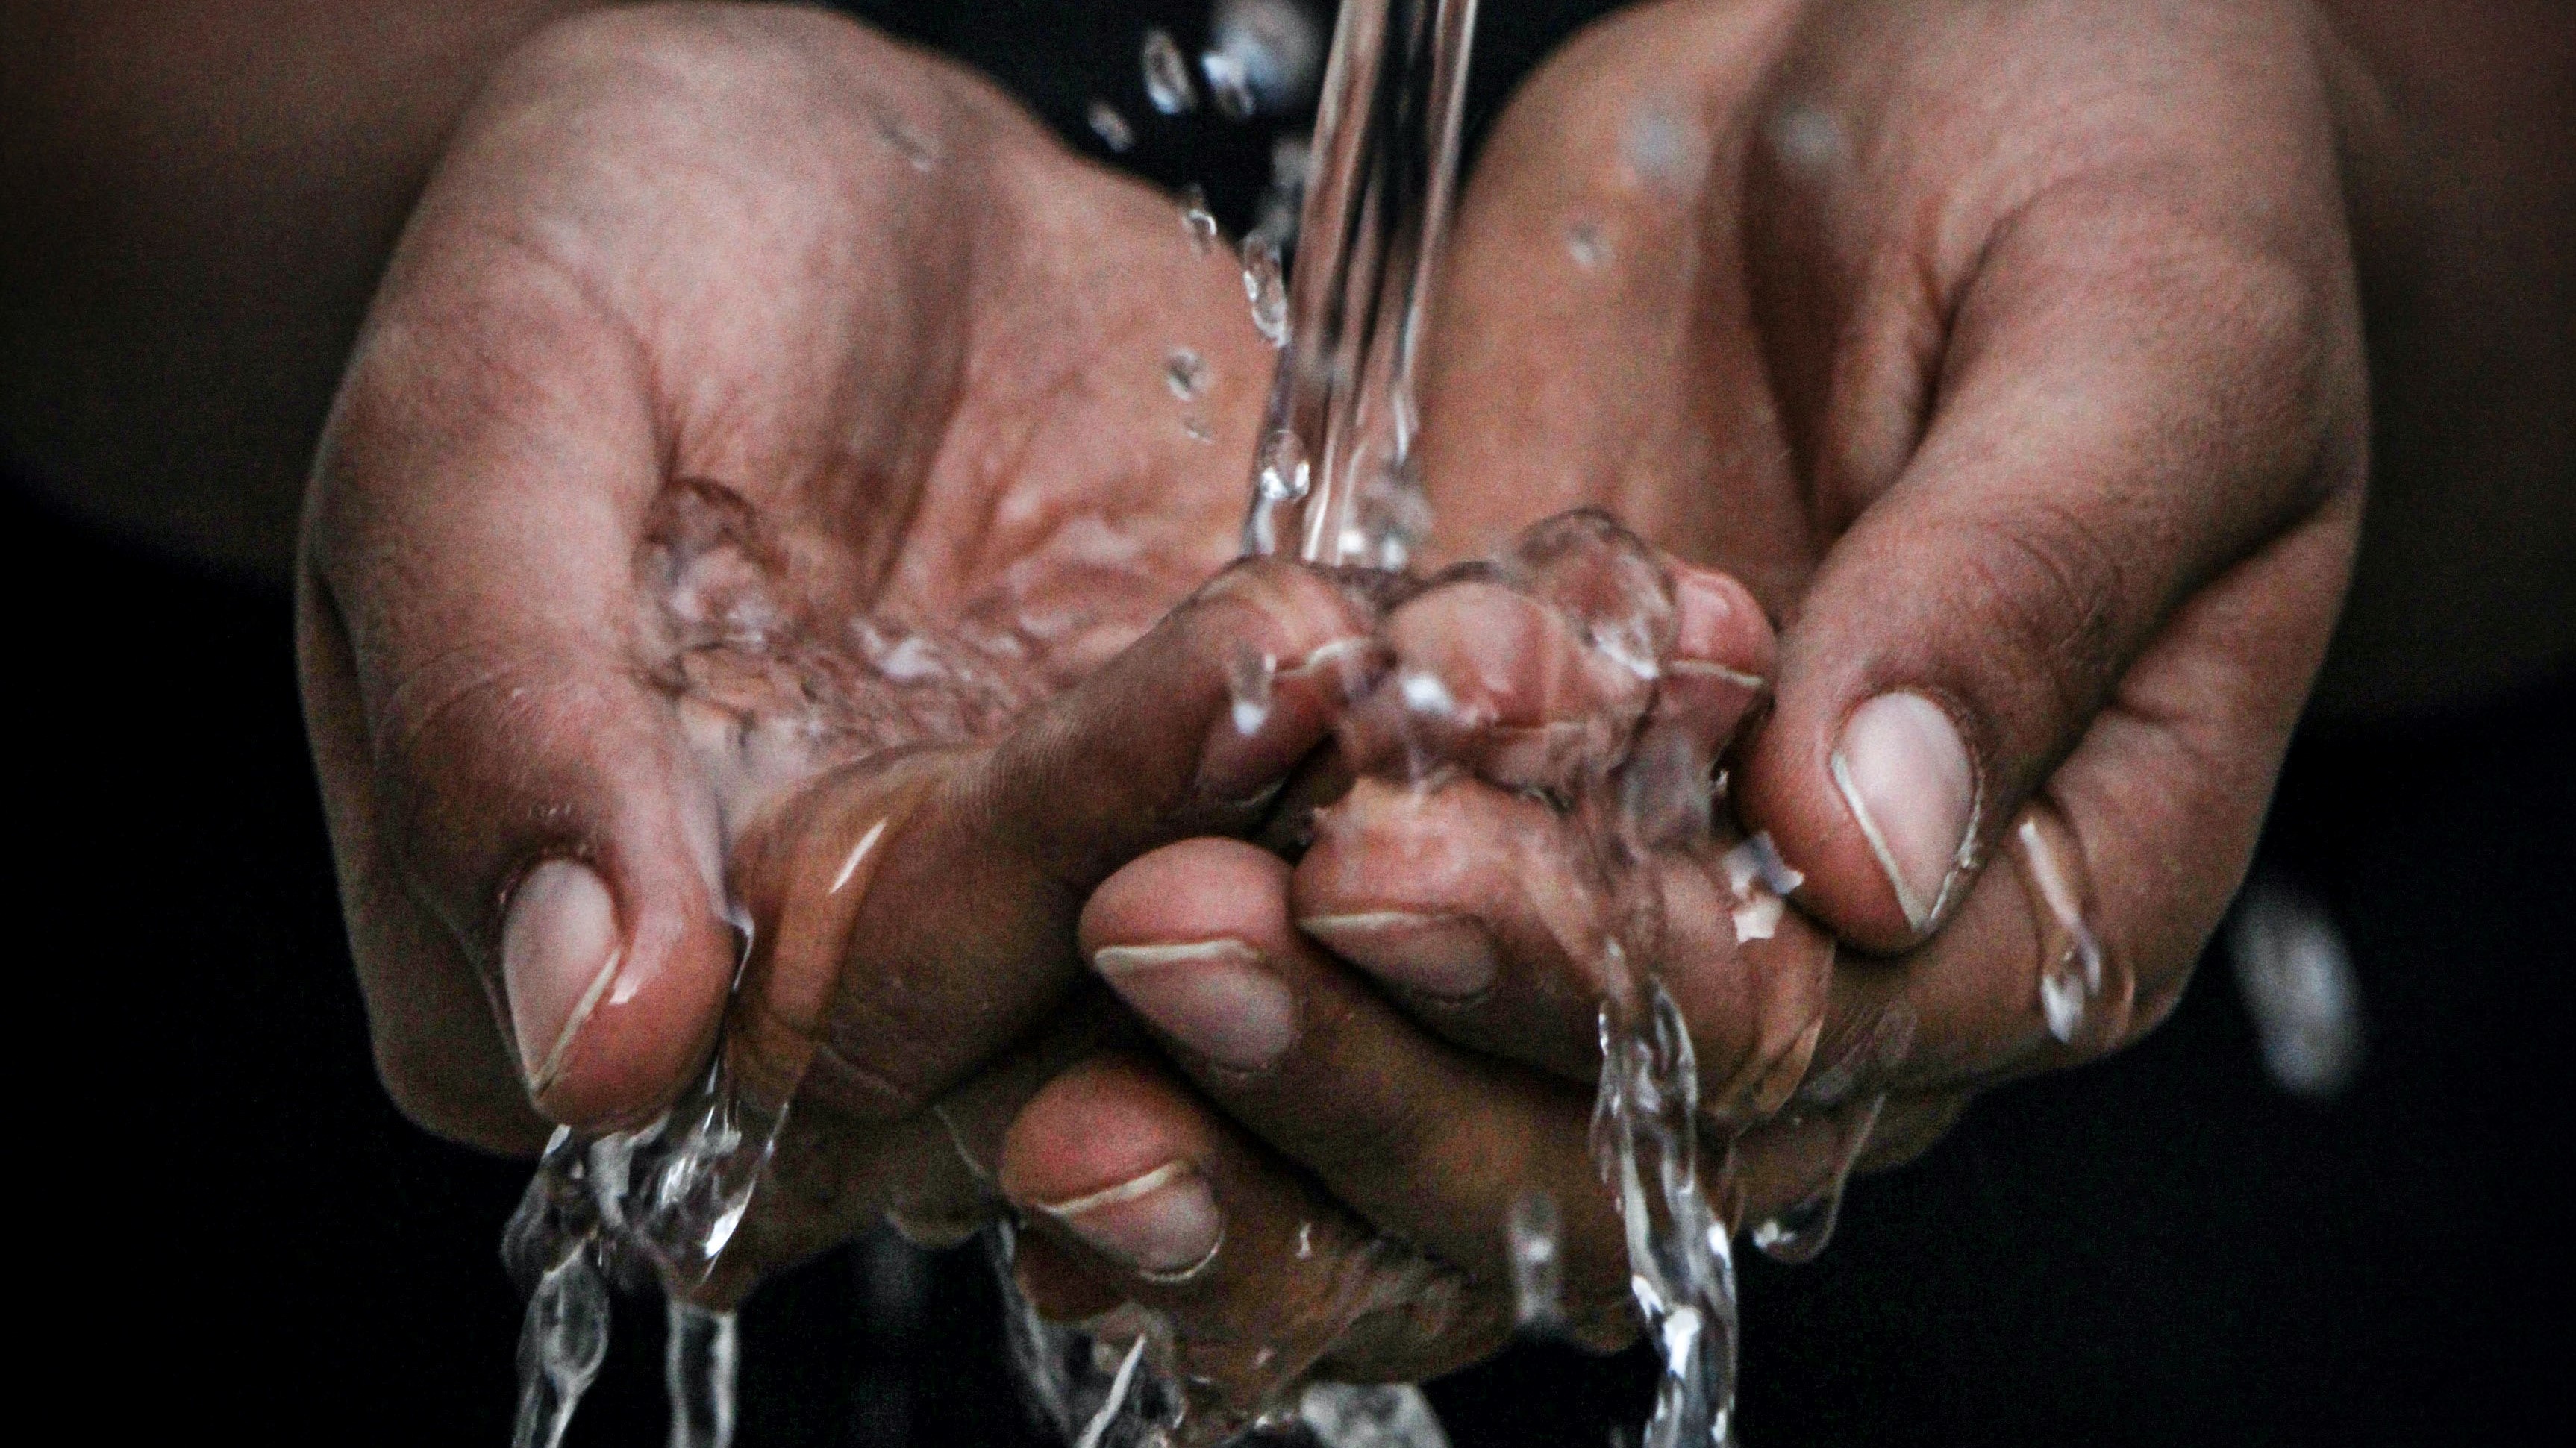 Cupped hands under running water